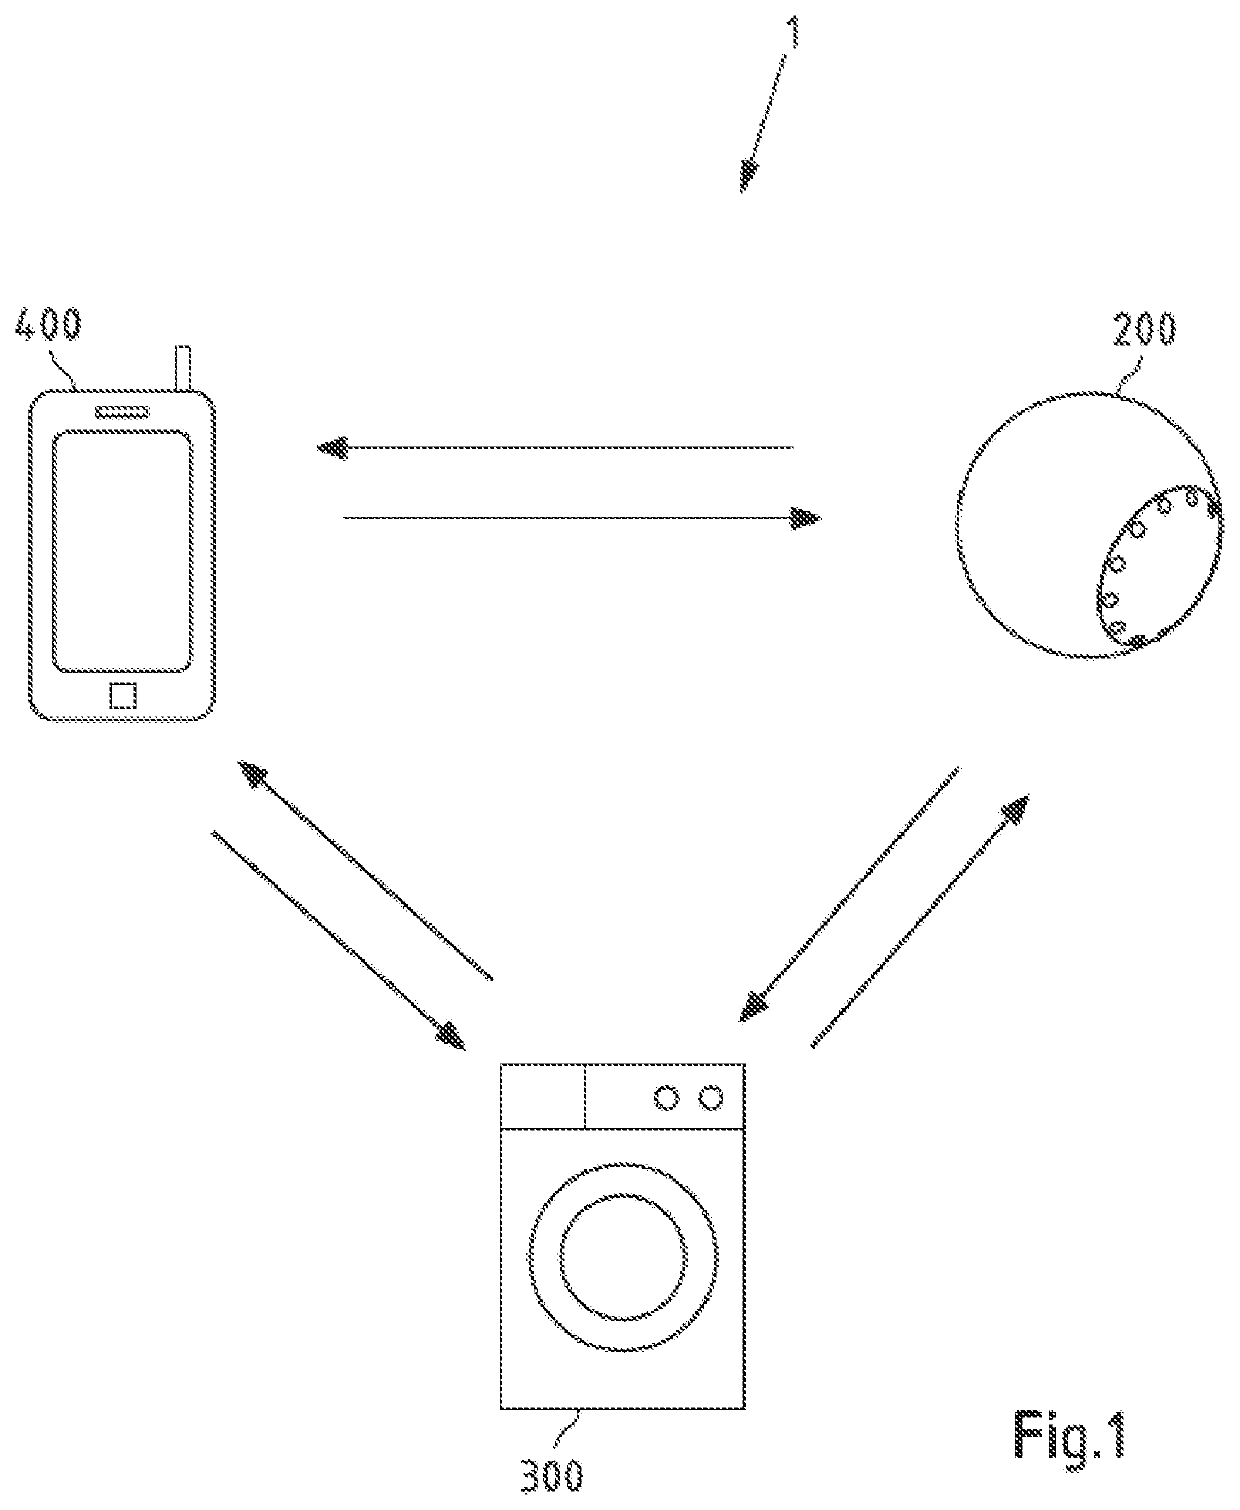 Use of external information in the operation of a household device